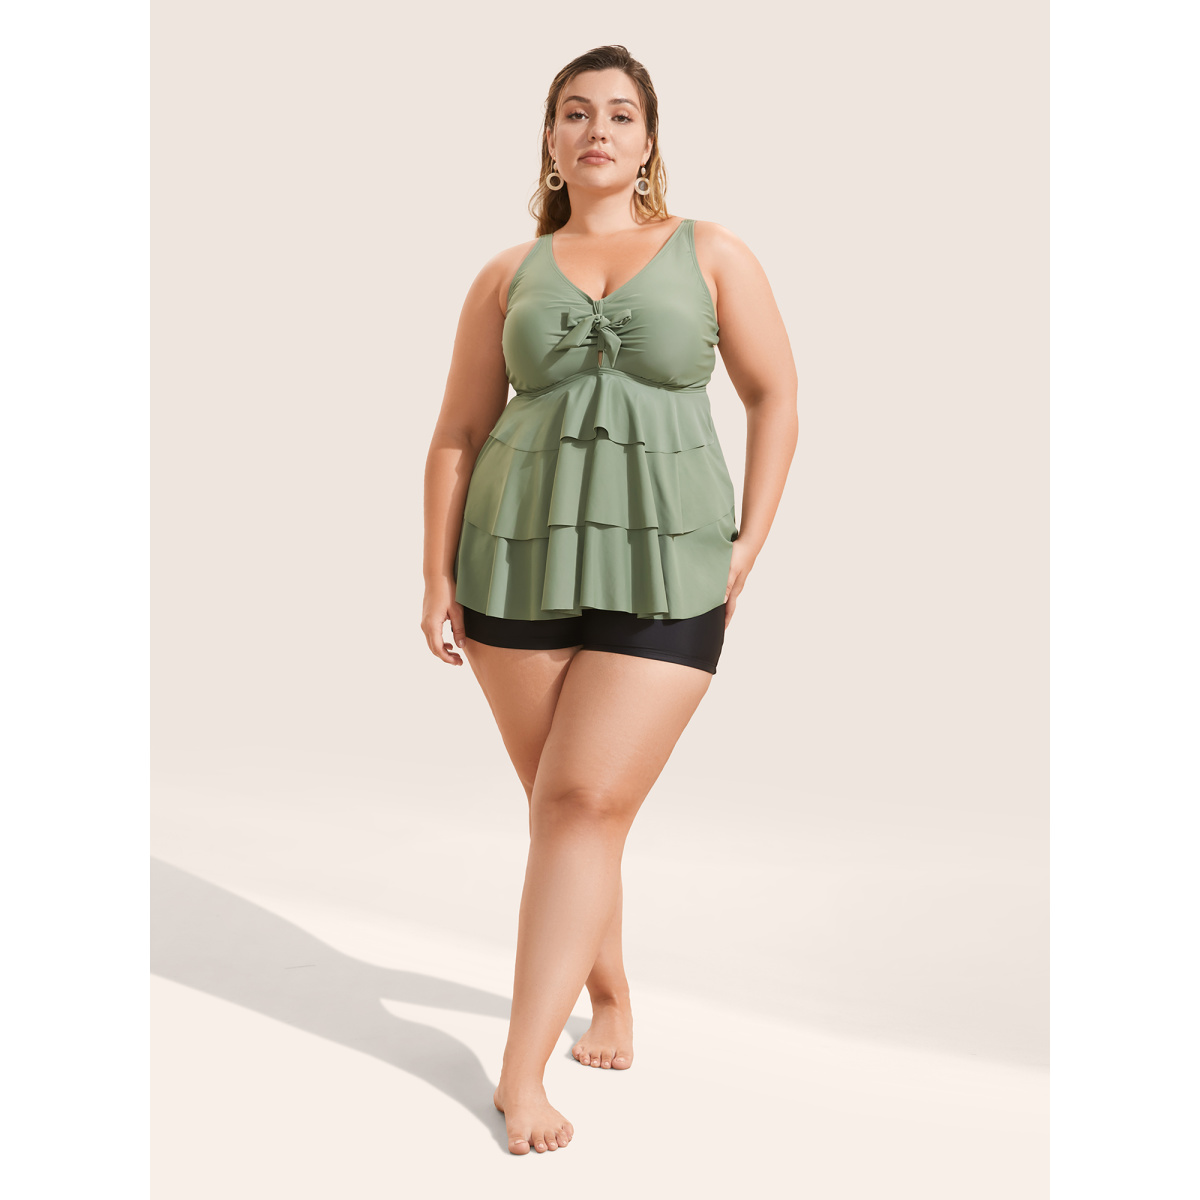 

Plus Size Knotted Front Ruffle Tiered Tankini Top Women's Swimwear ArmyGreen Beach Ruffles High stretch Bodycon V-neck Curve Swim Tops BloomChic